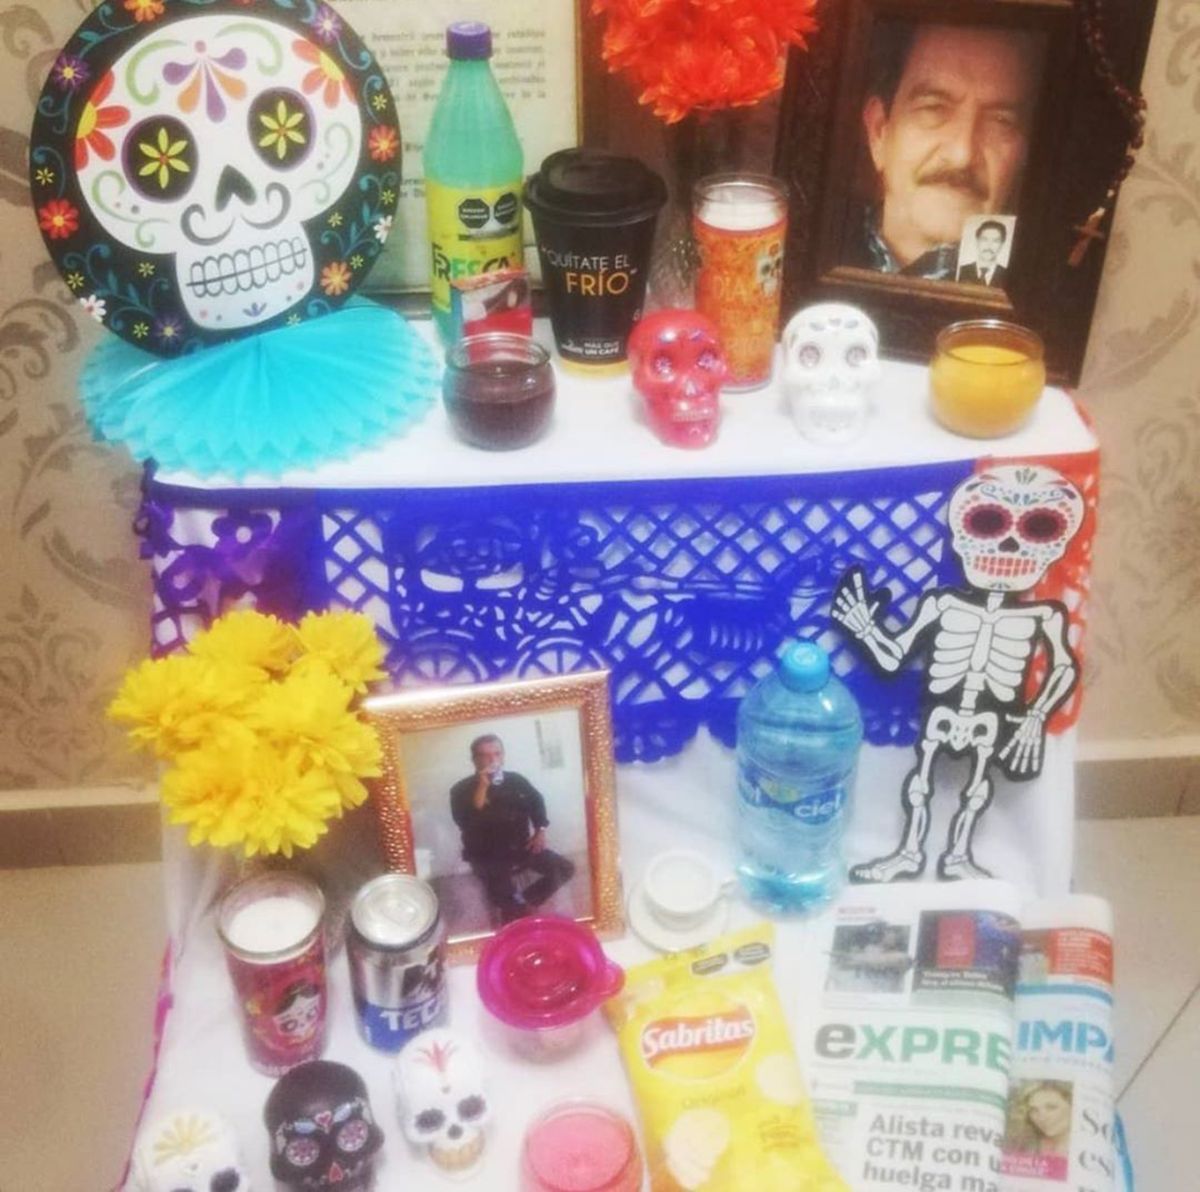 Sisters and mother of Ana Patricia also make her altar of the dead